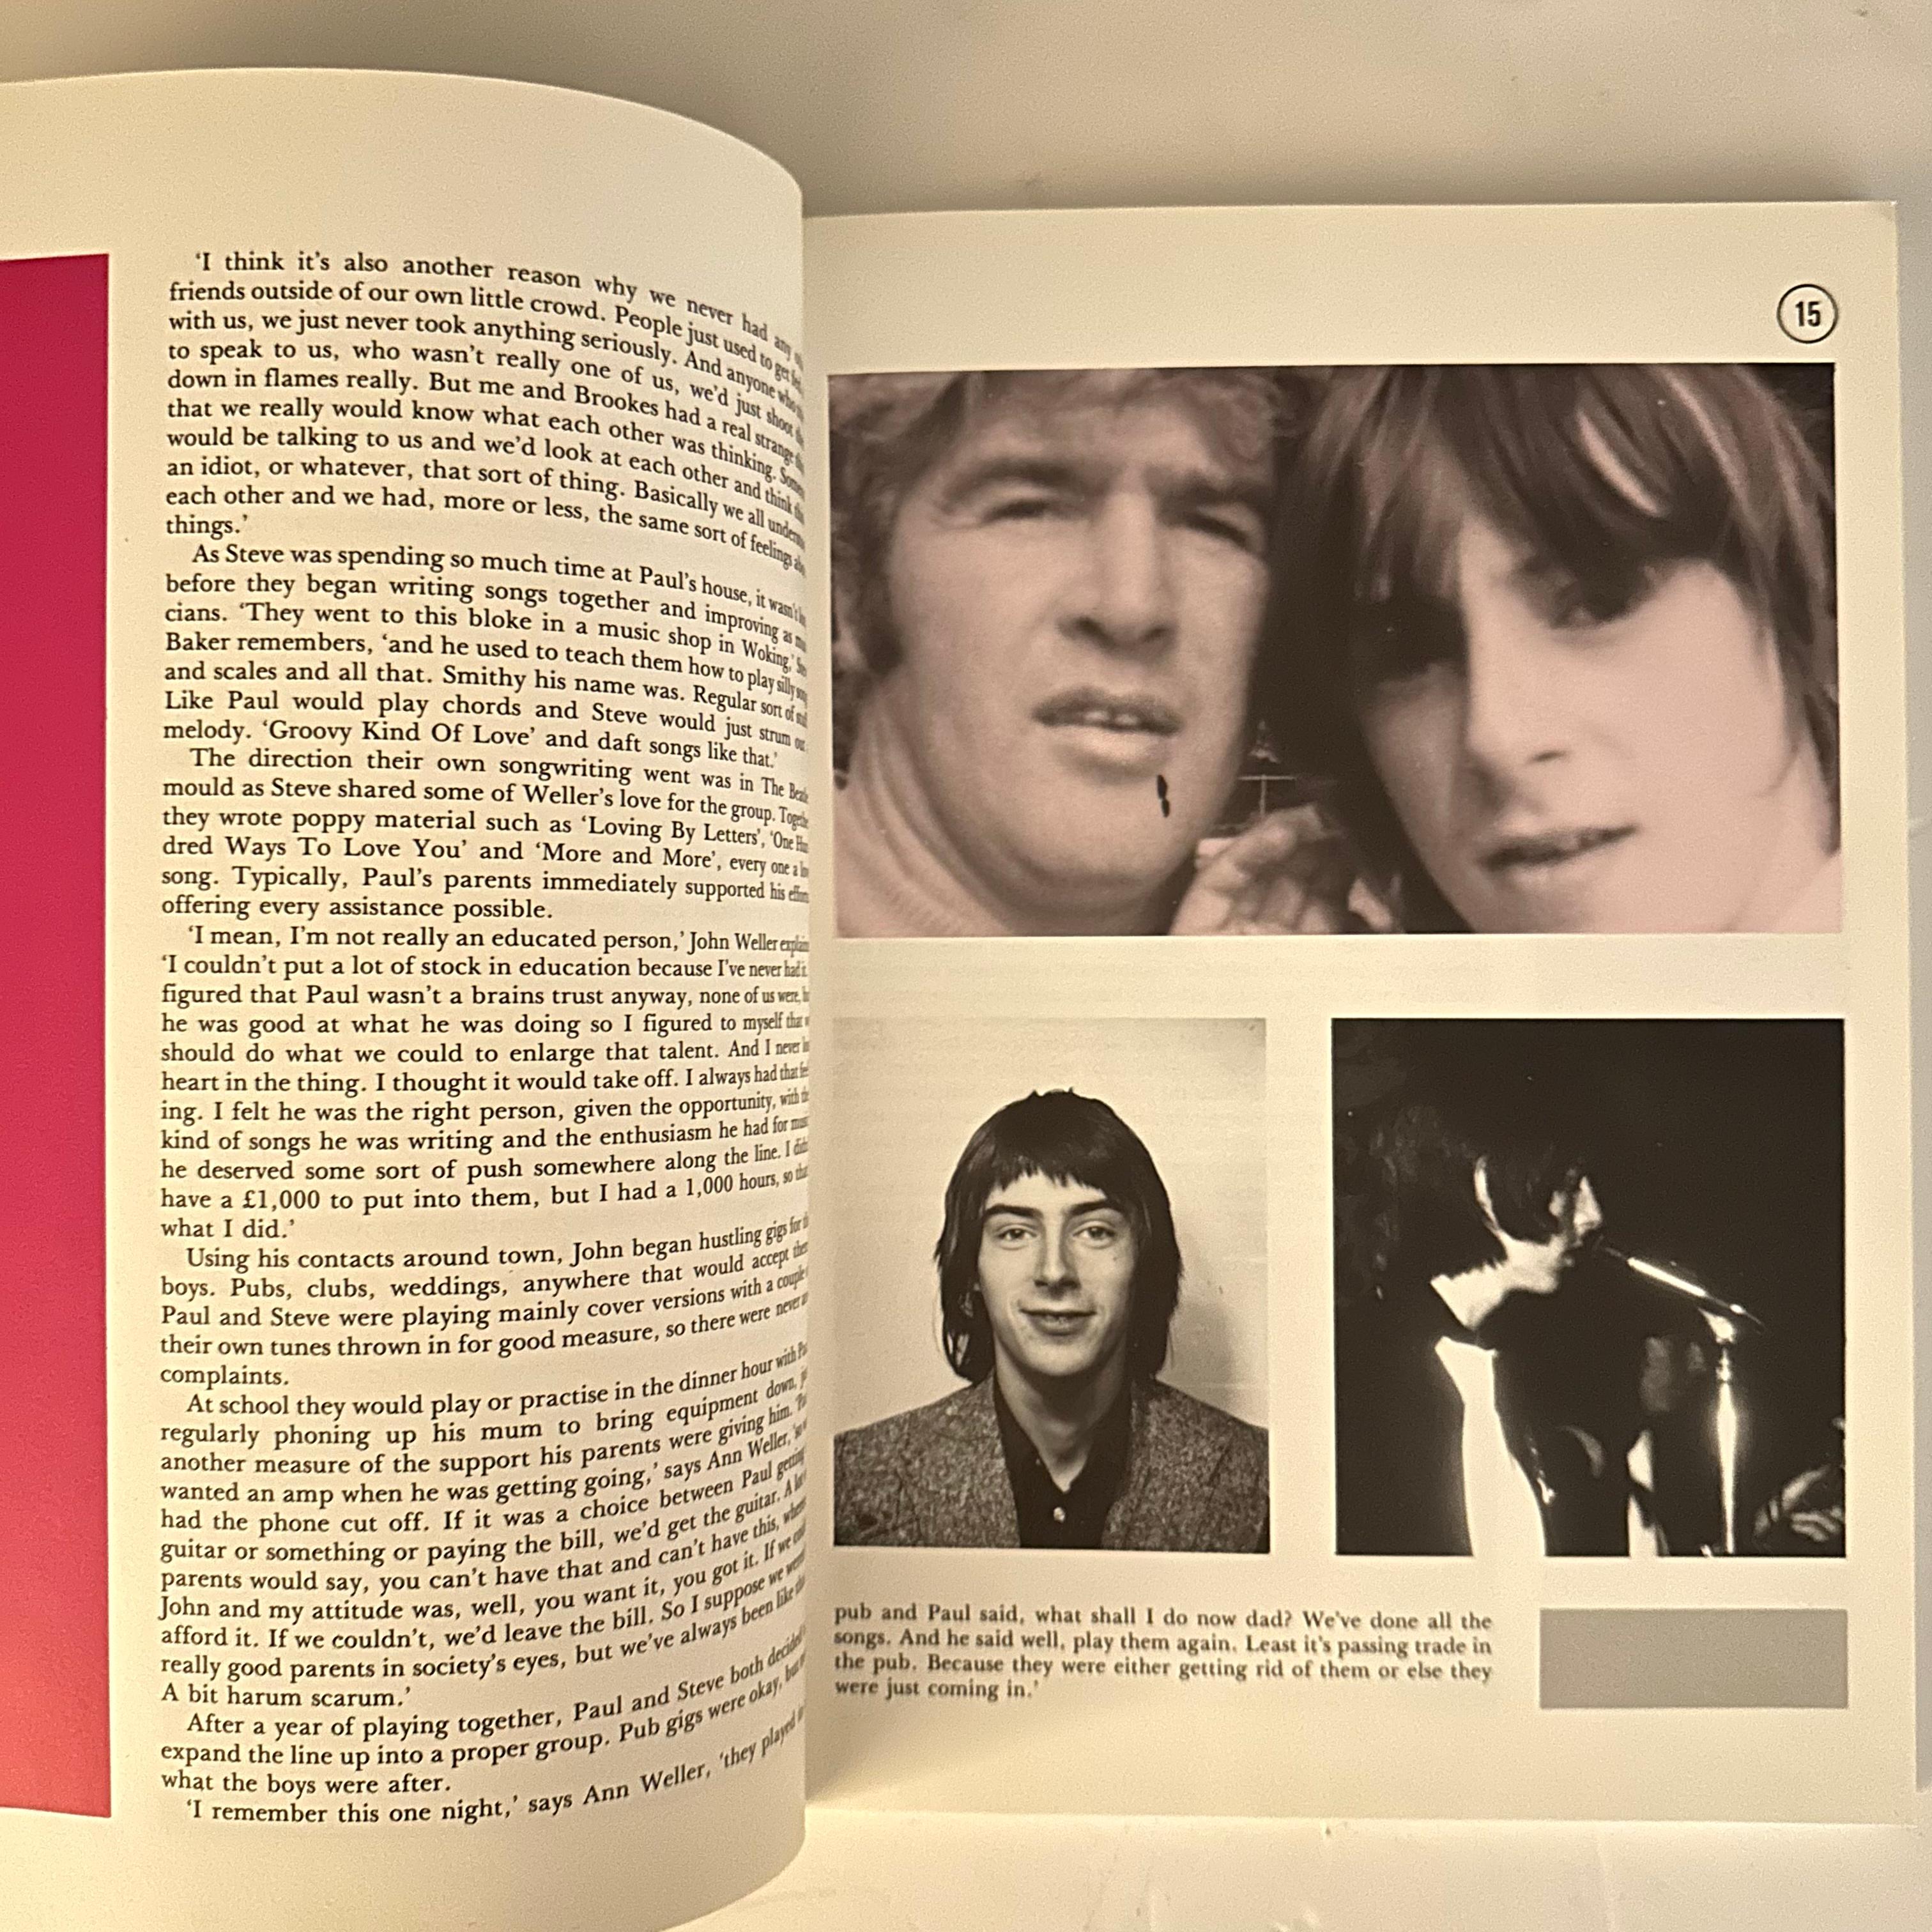 Published by William Clowes Limited, 1st edition, London, 1983. Soft cover, English text.

The Jam is a rock trio who were known for their mod image, quintessential English flavour and the distinct stylistic mixture of psychedelic rock and 1960s